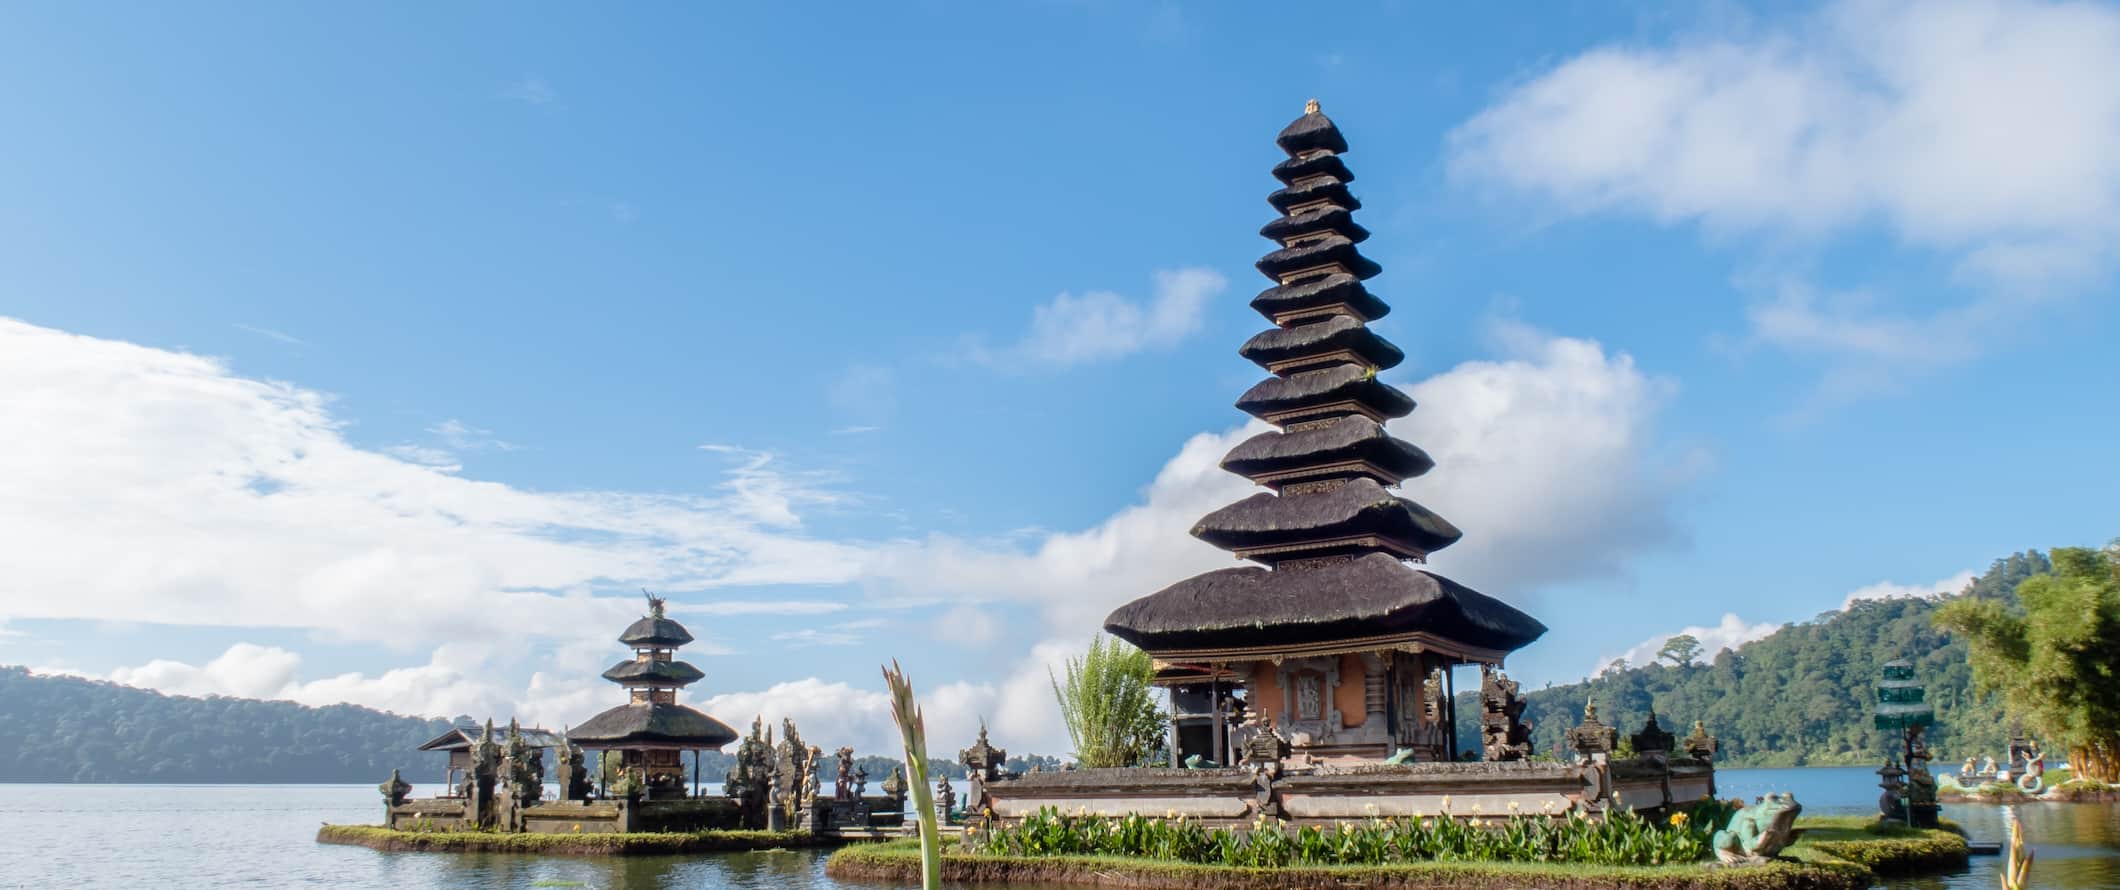 An ancient pagoda along the water in beautiful Bali, Indonesia